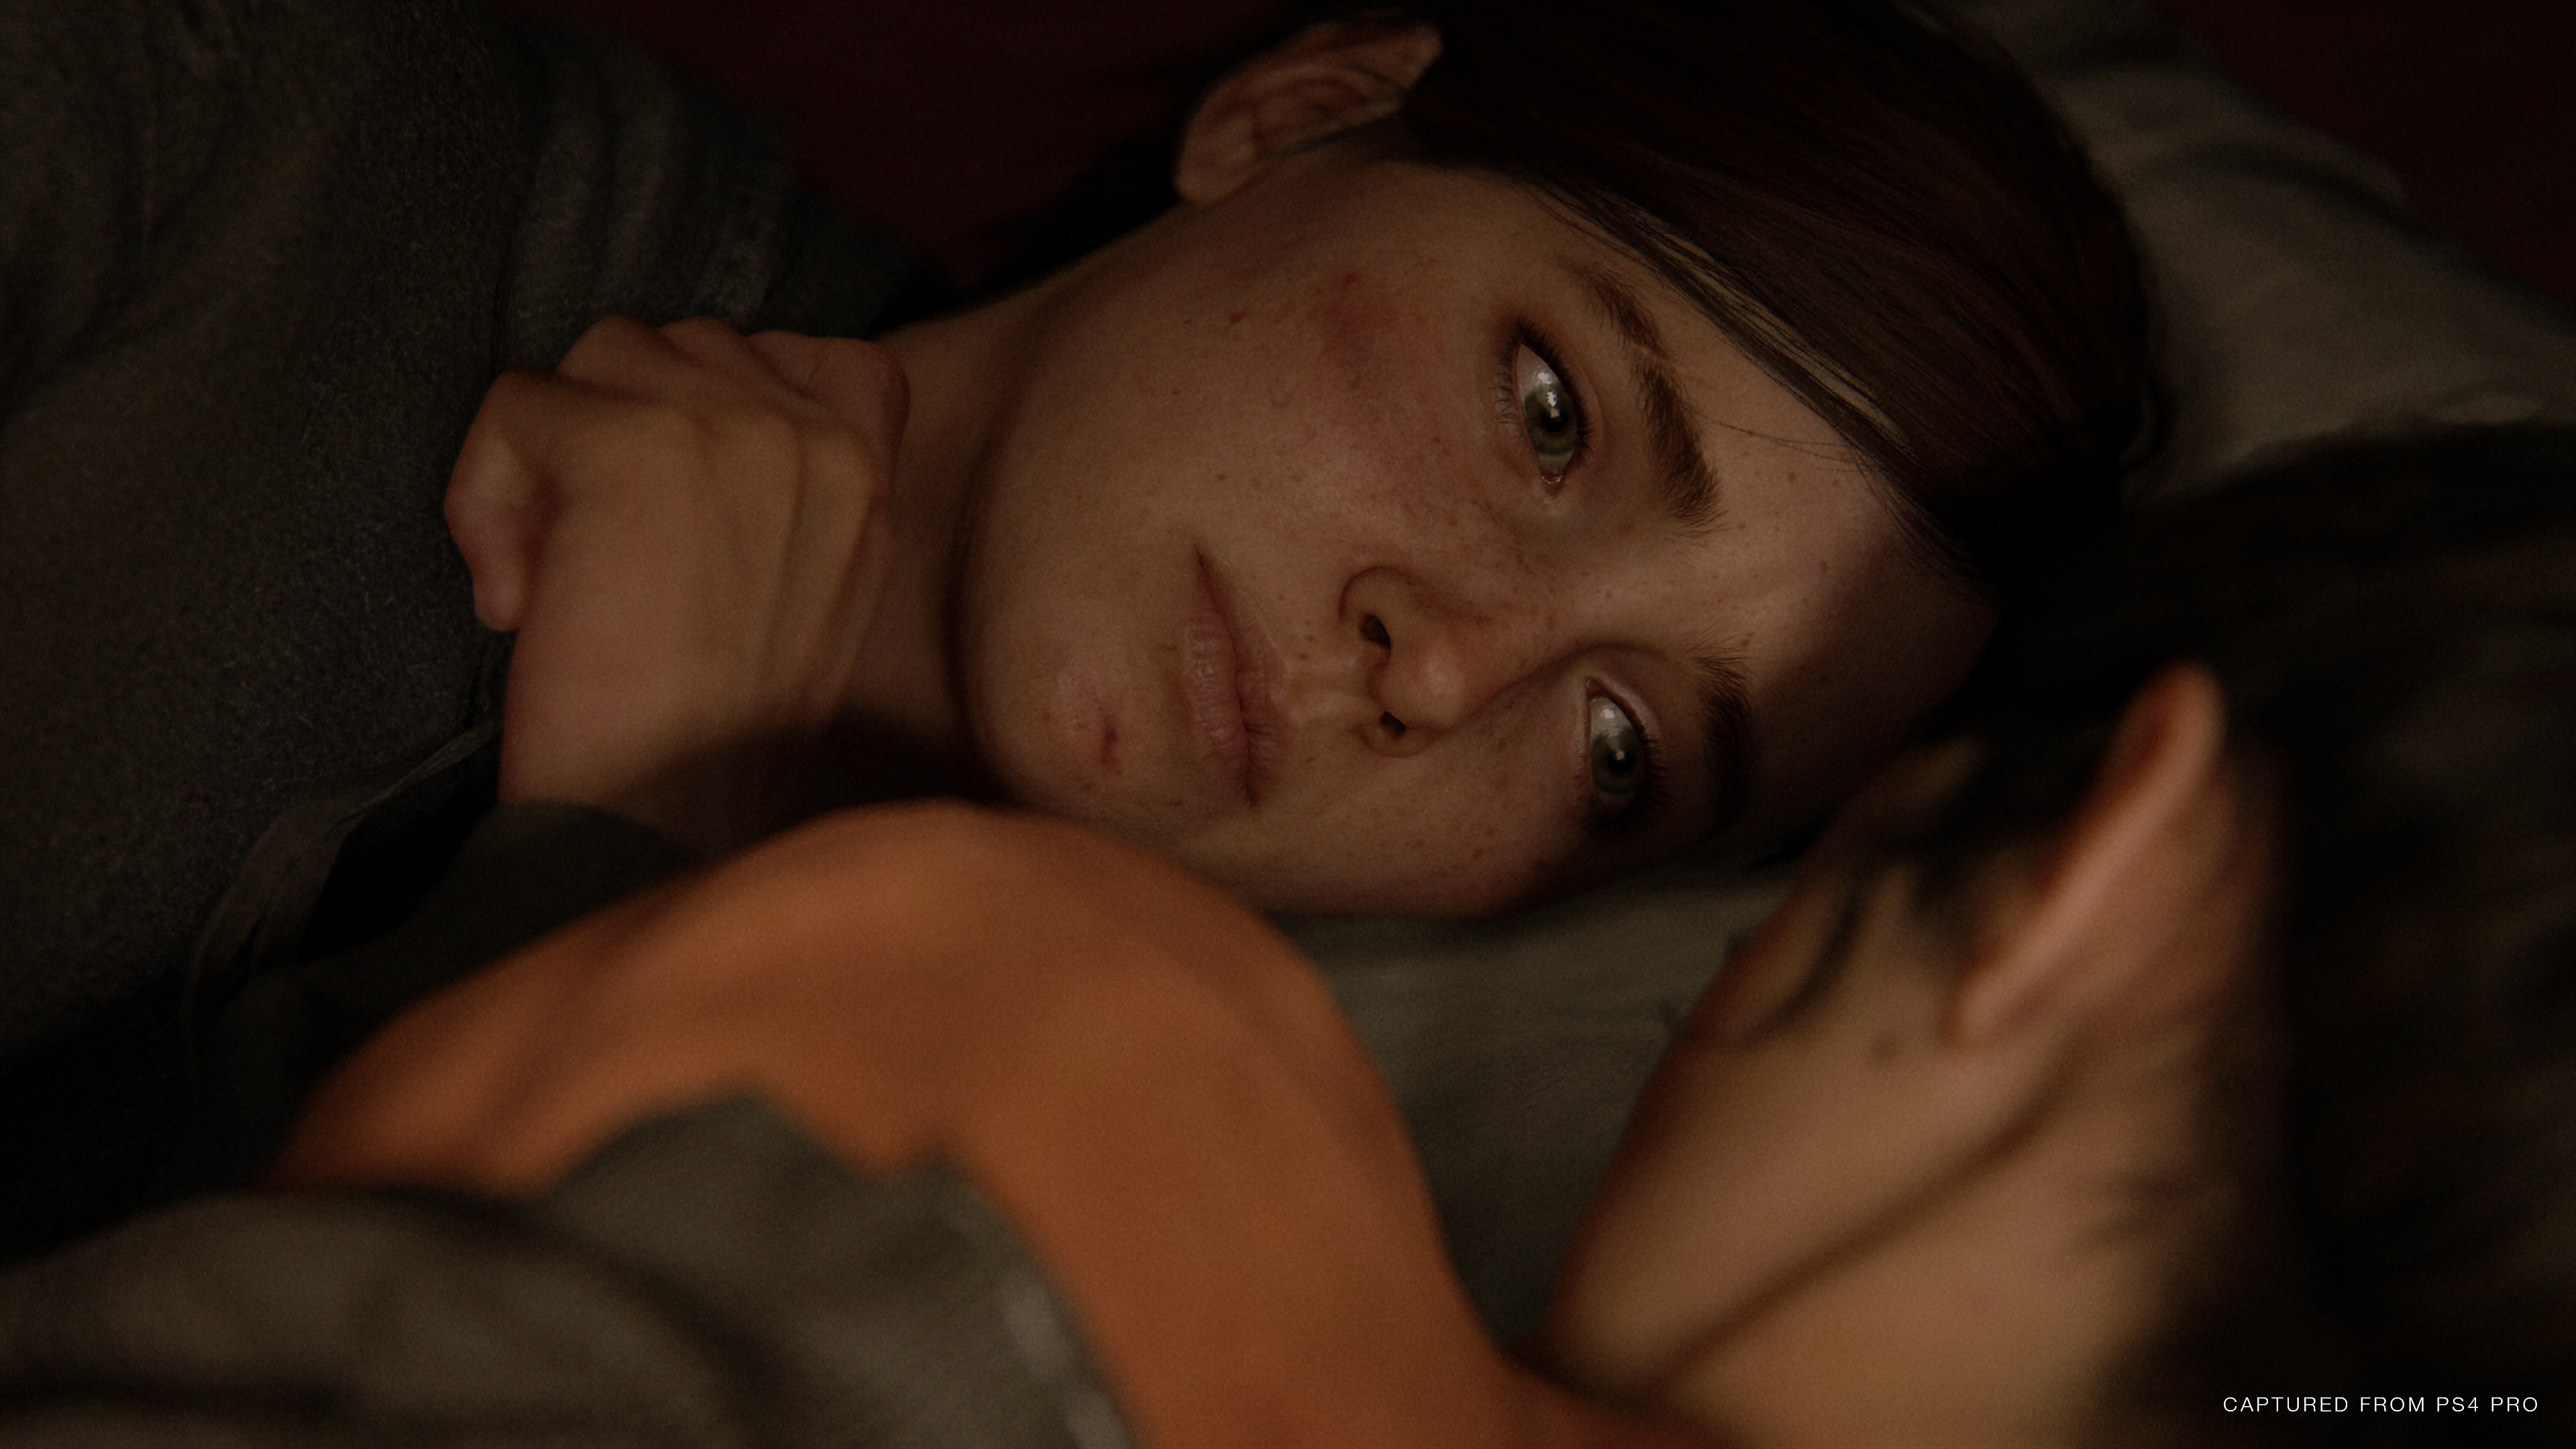 The Last of Us: Part 2